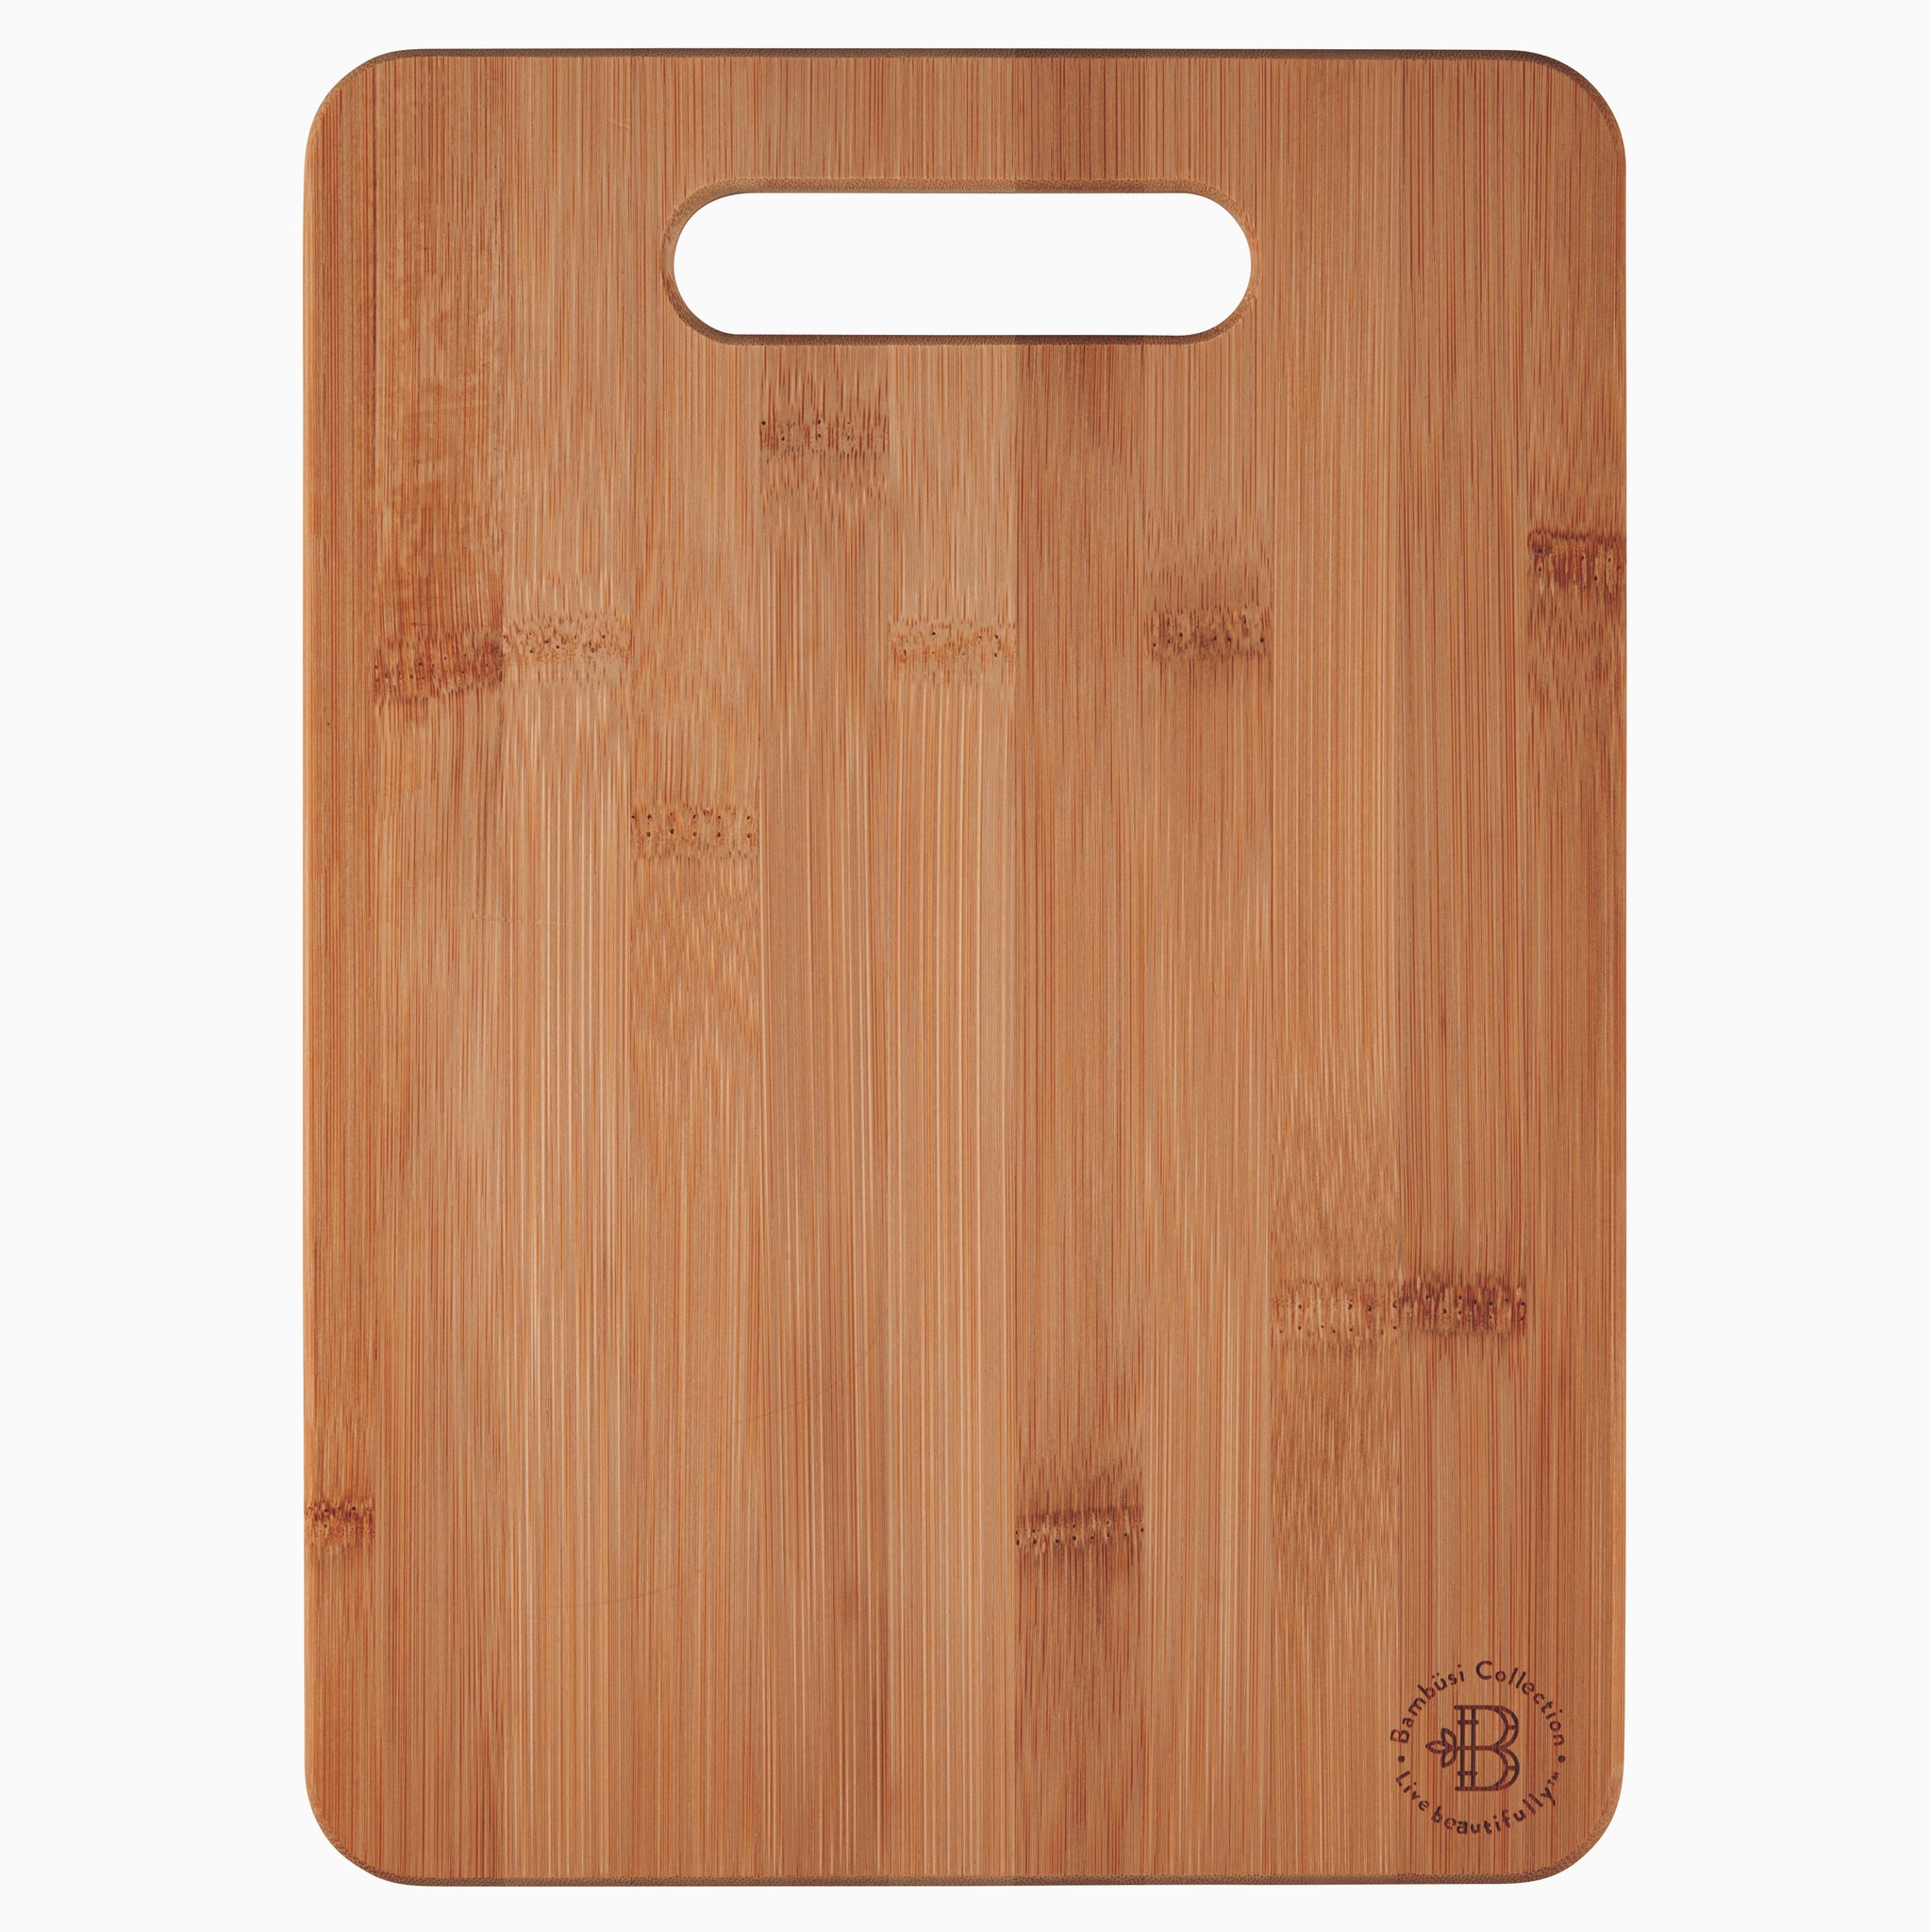 3 Bamboo Cutting Boards Antibacterial Chopping Carving Wooden Serving Board